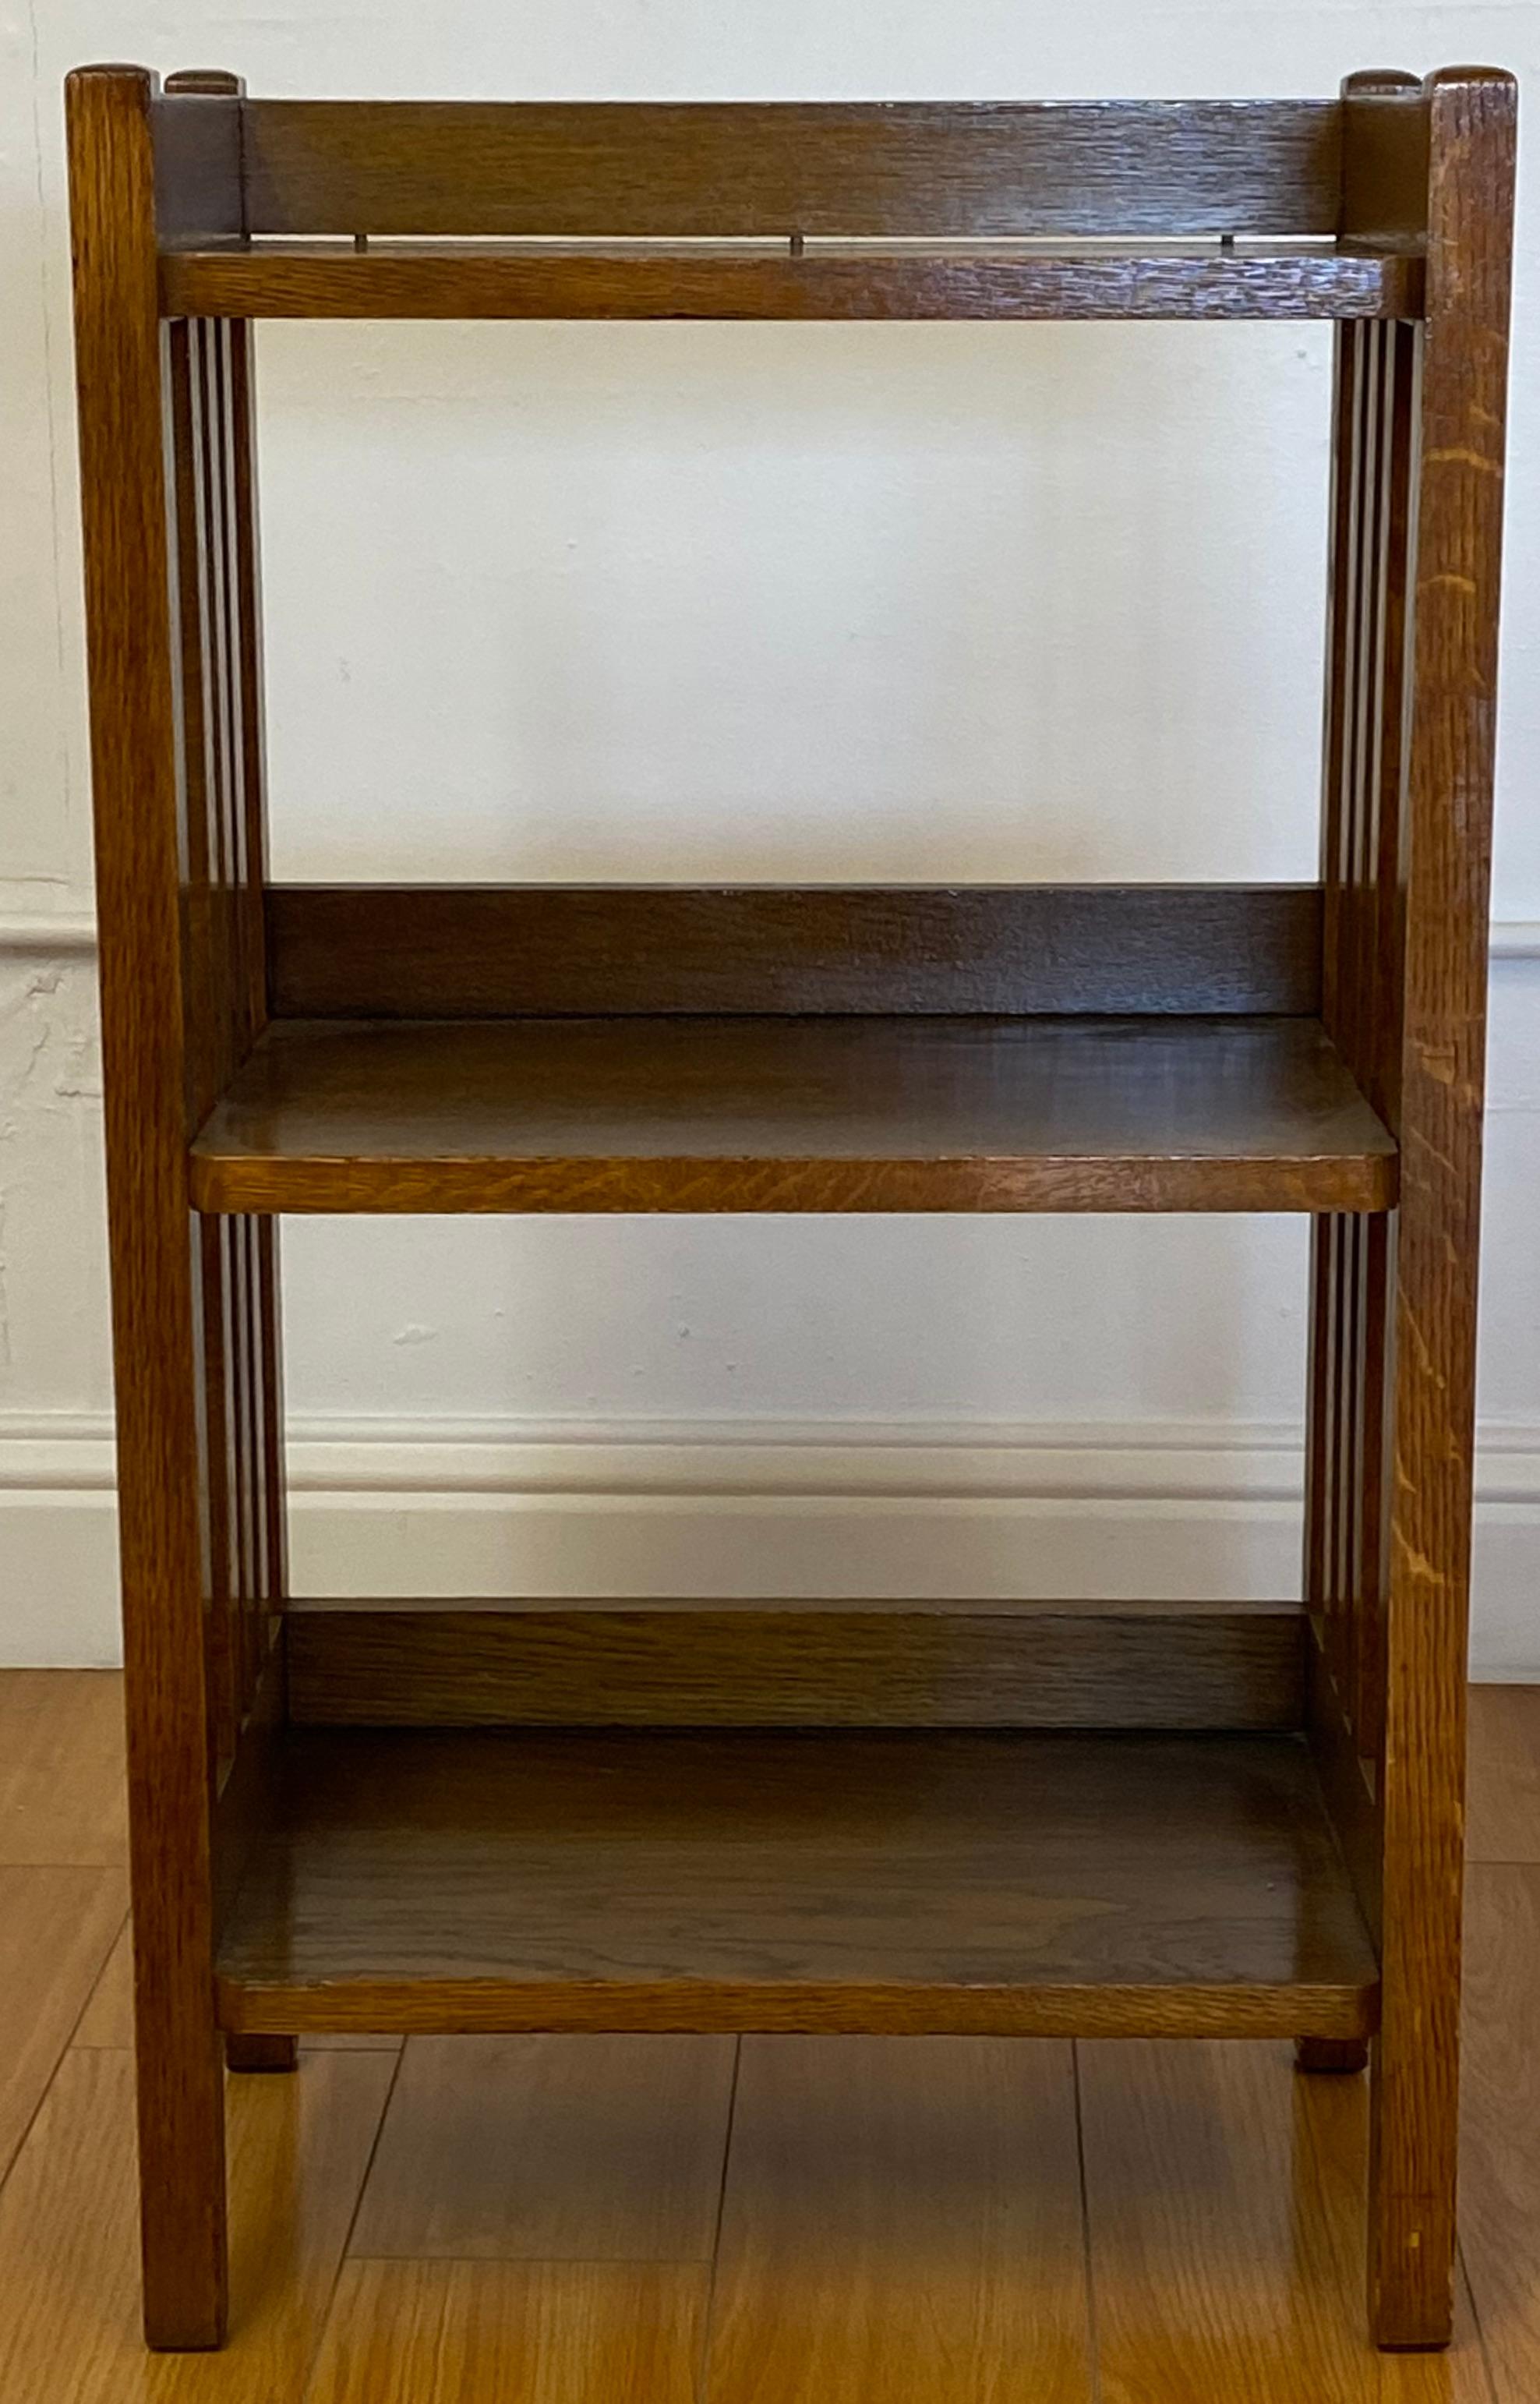 Early 20th century L & J G Stickley mission oak bookcase, circa 1920

Handsome Arts & Crafts bookcase by L&J.G. Stickley

Measures: 19